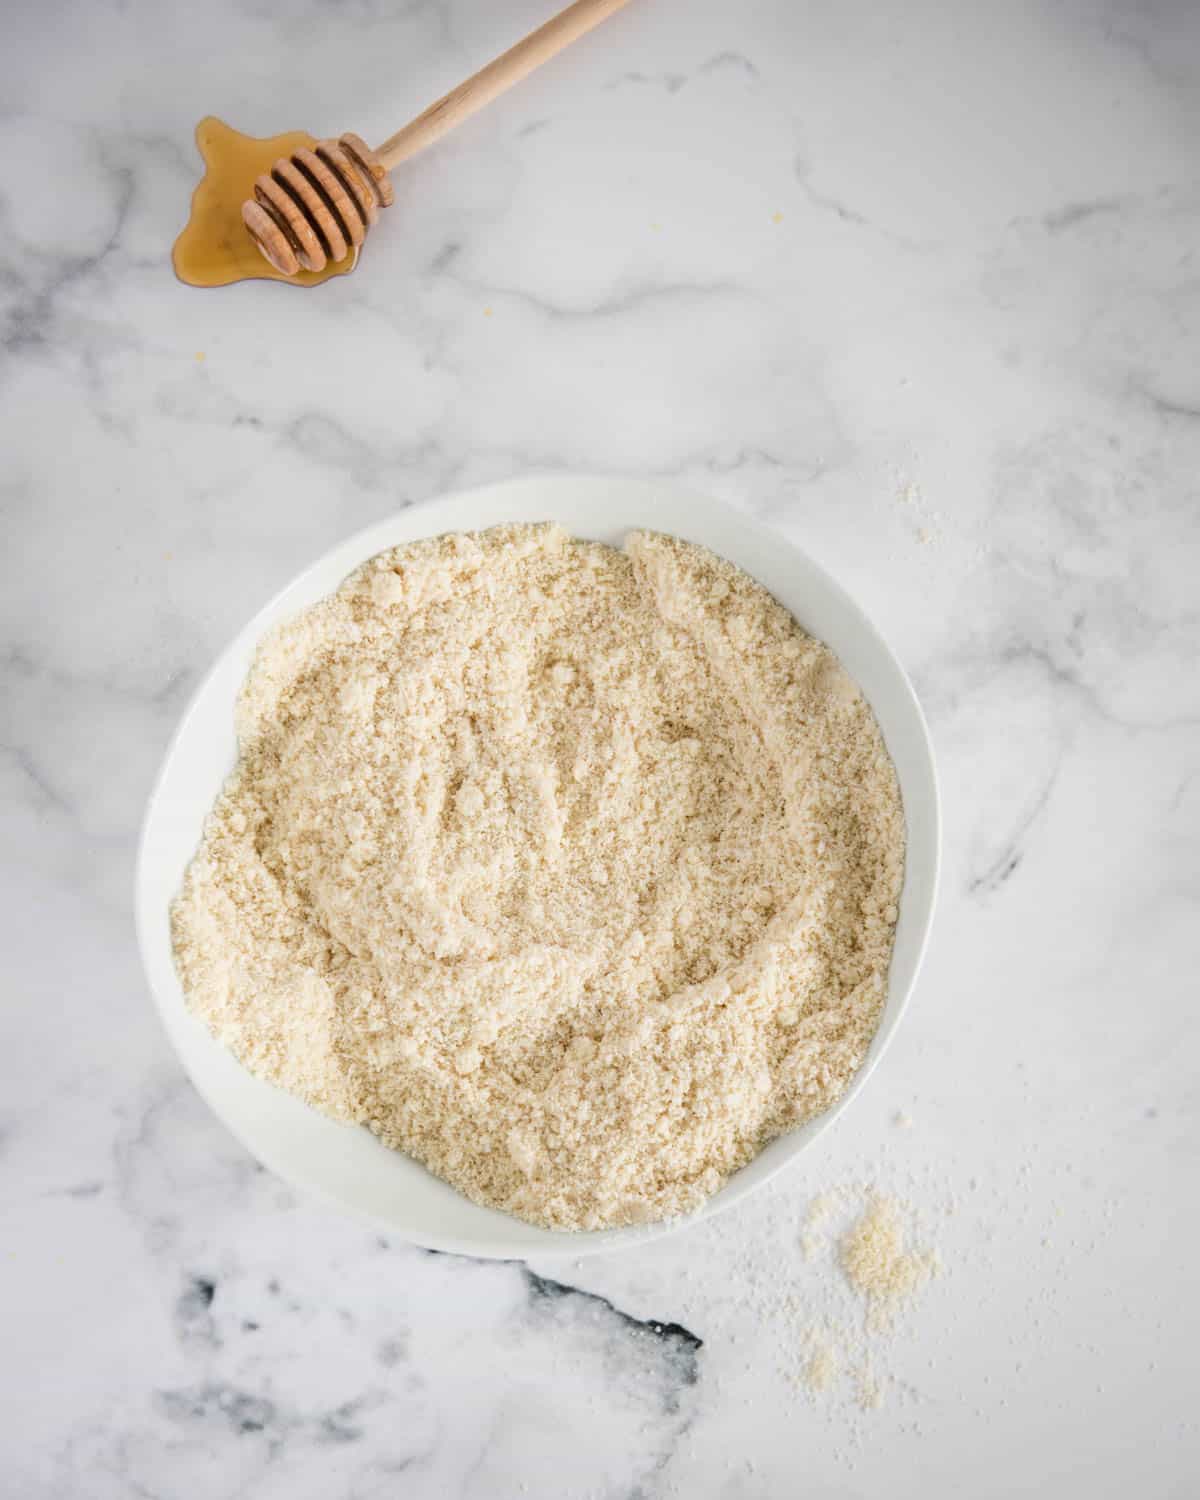 bowl of flour and other muffin ingredients  on white background